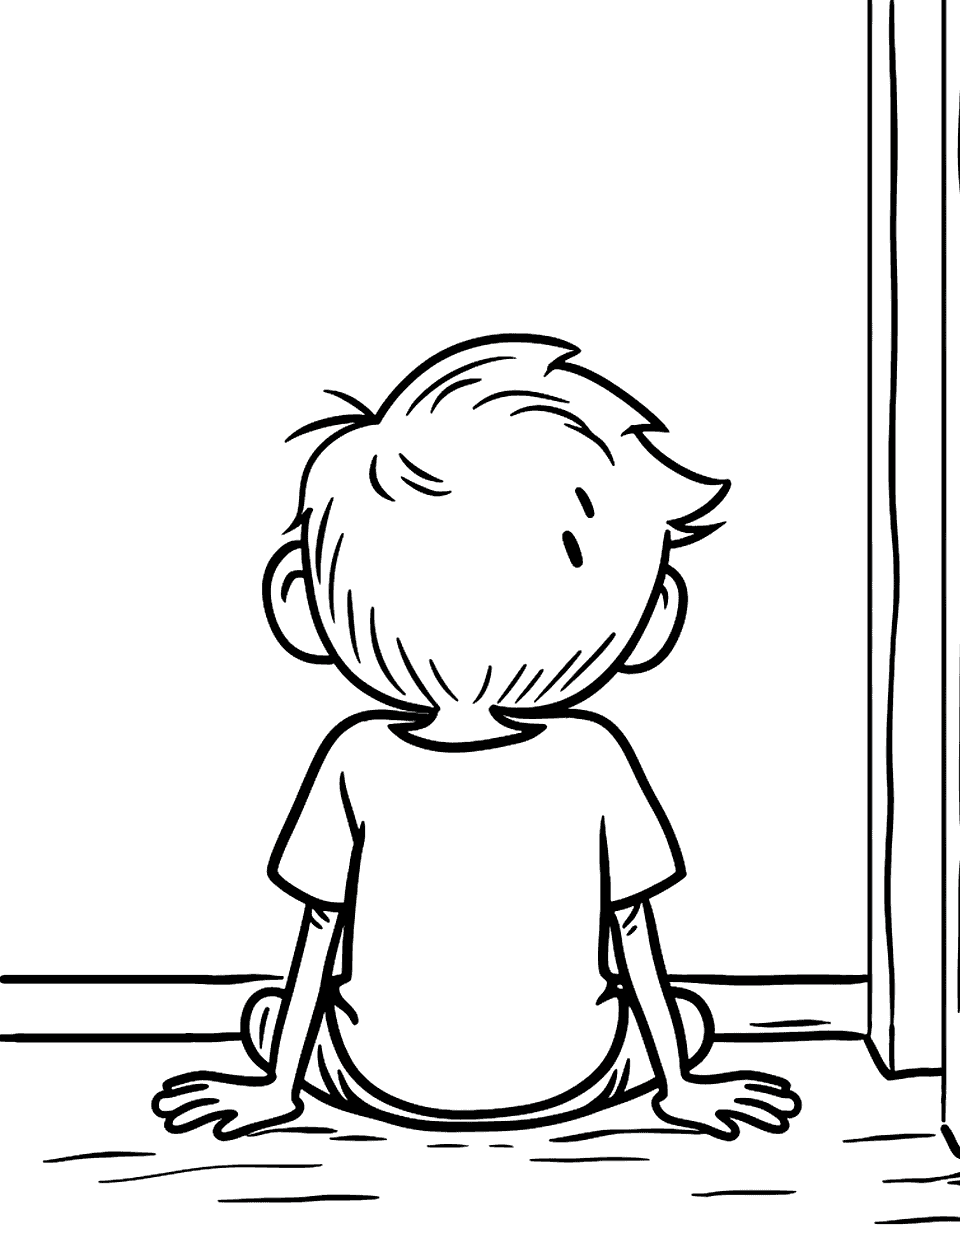 Boy in His Room Toddler Coloring Page - A young boy sitting on the floor in his bedroom.